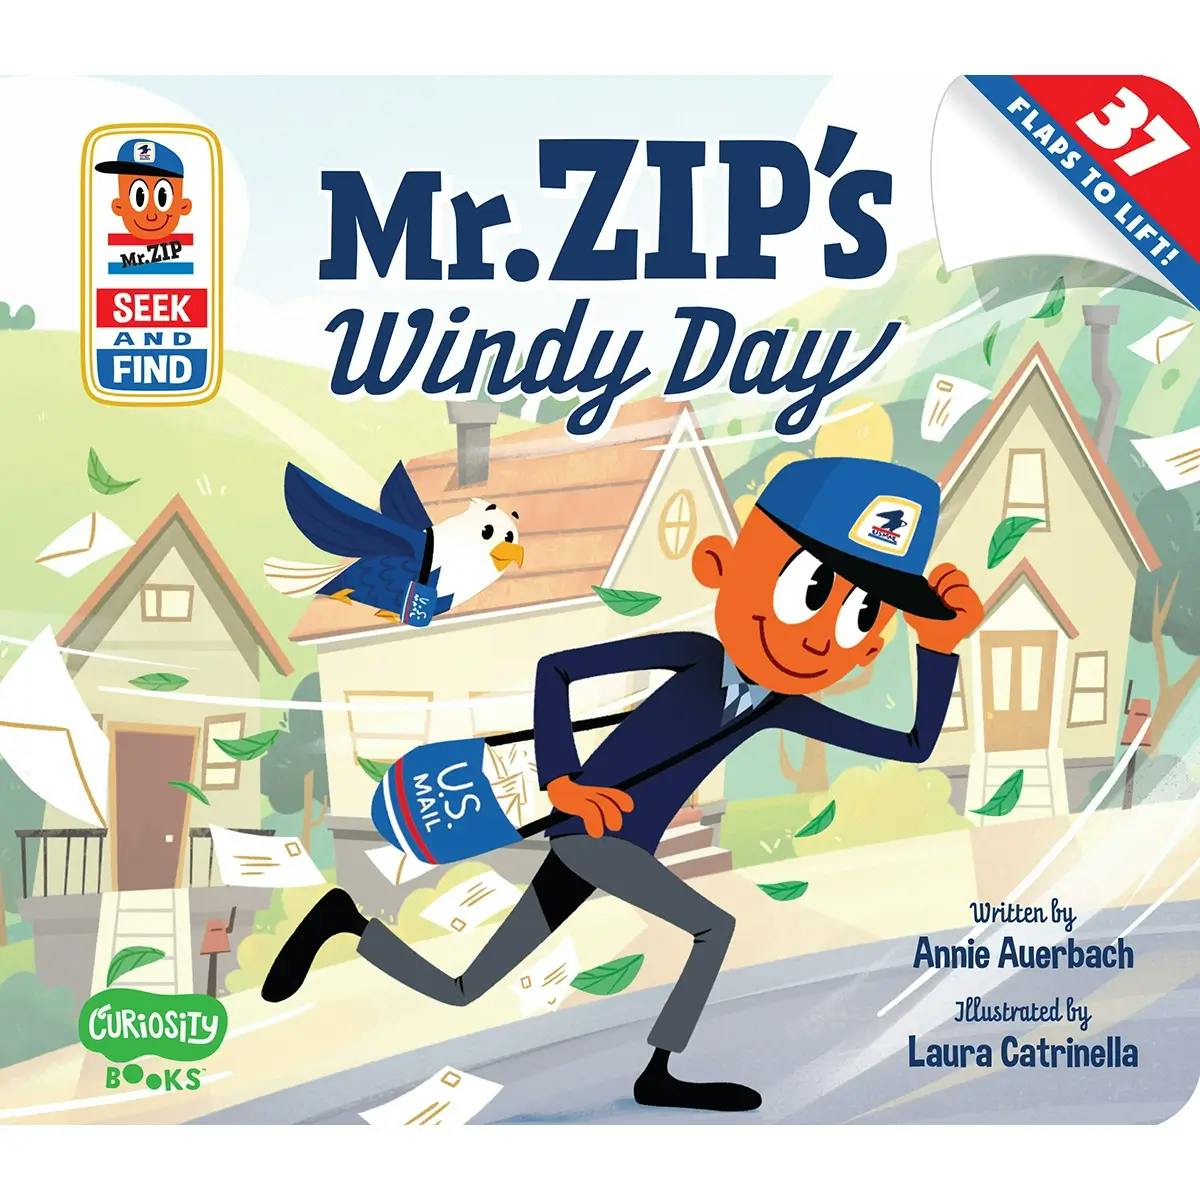 Cover of children's book "Mr. ZIP's Windy Day" by Curiosity Ink Media